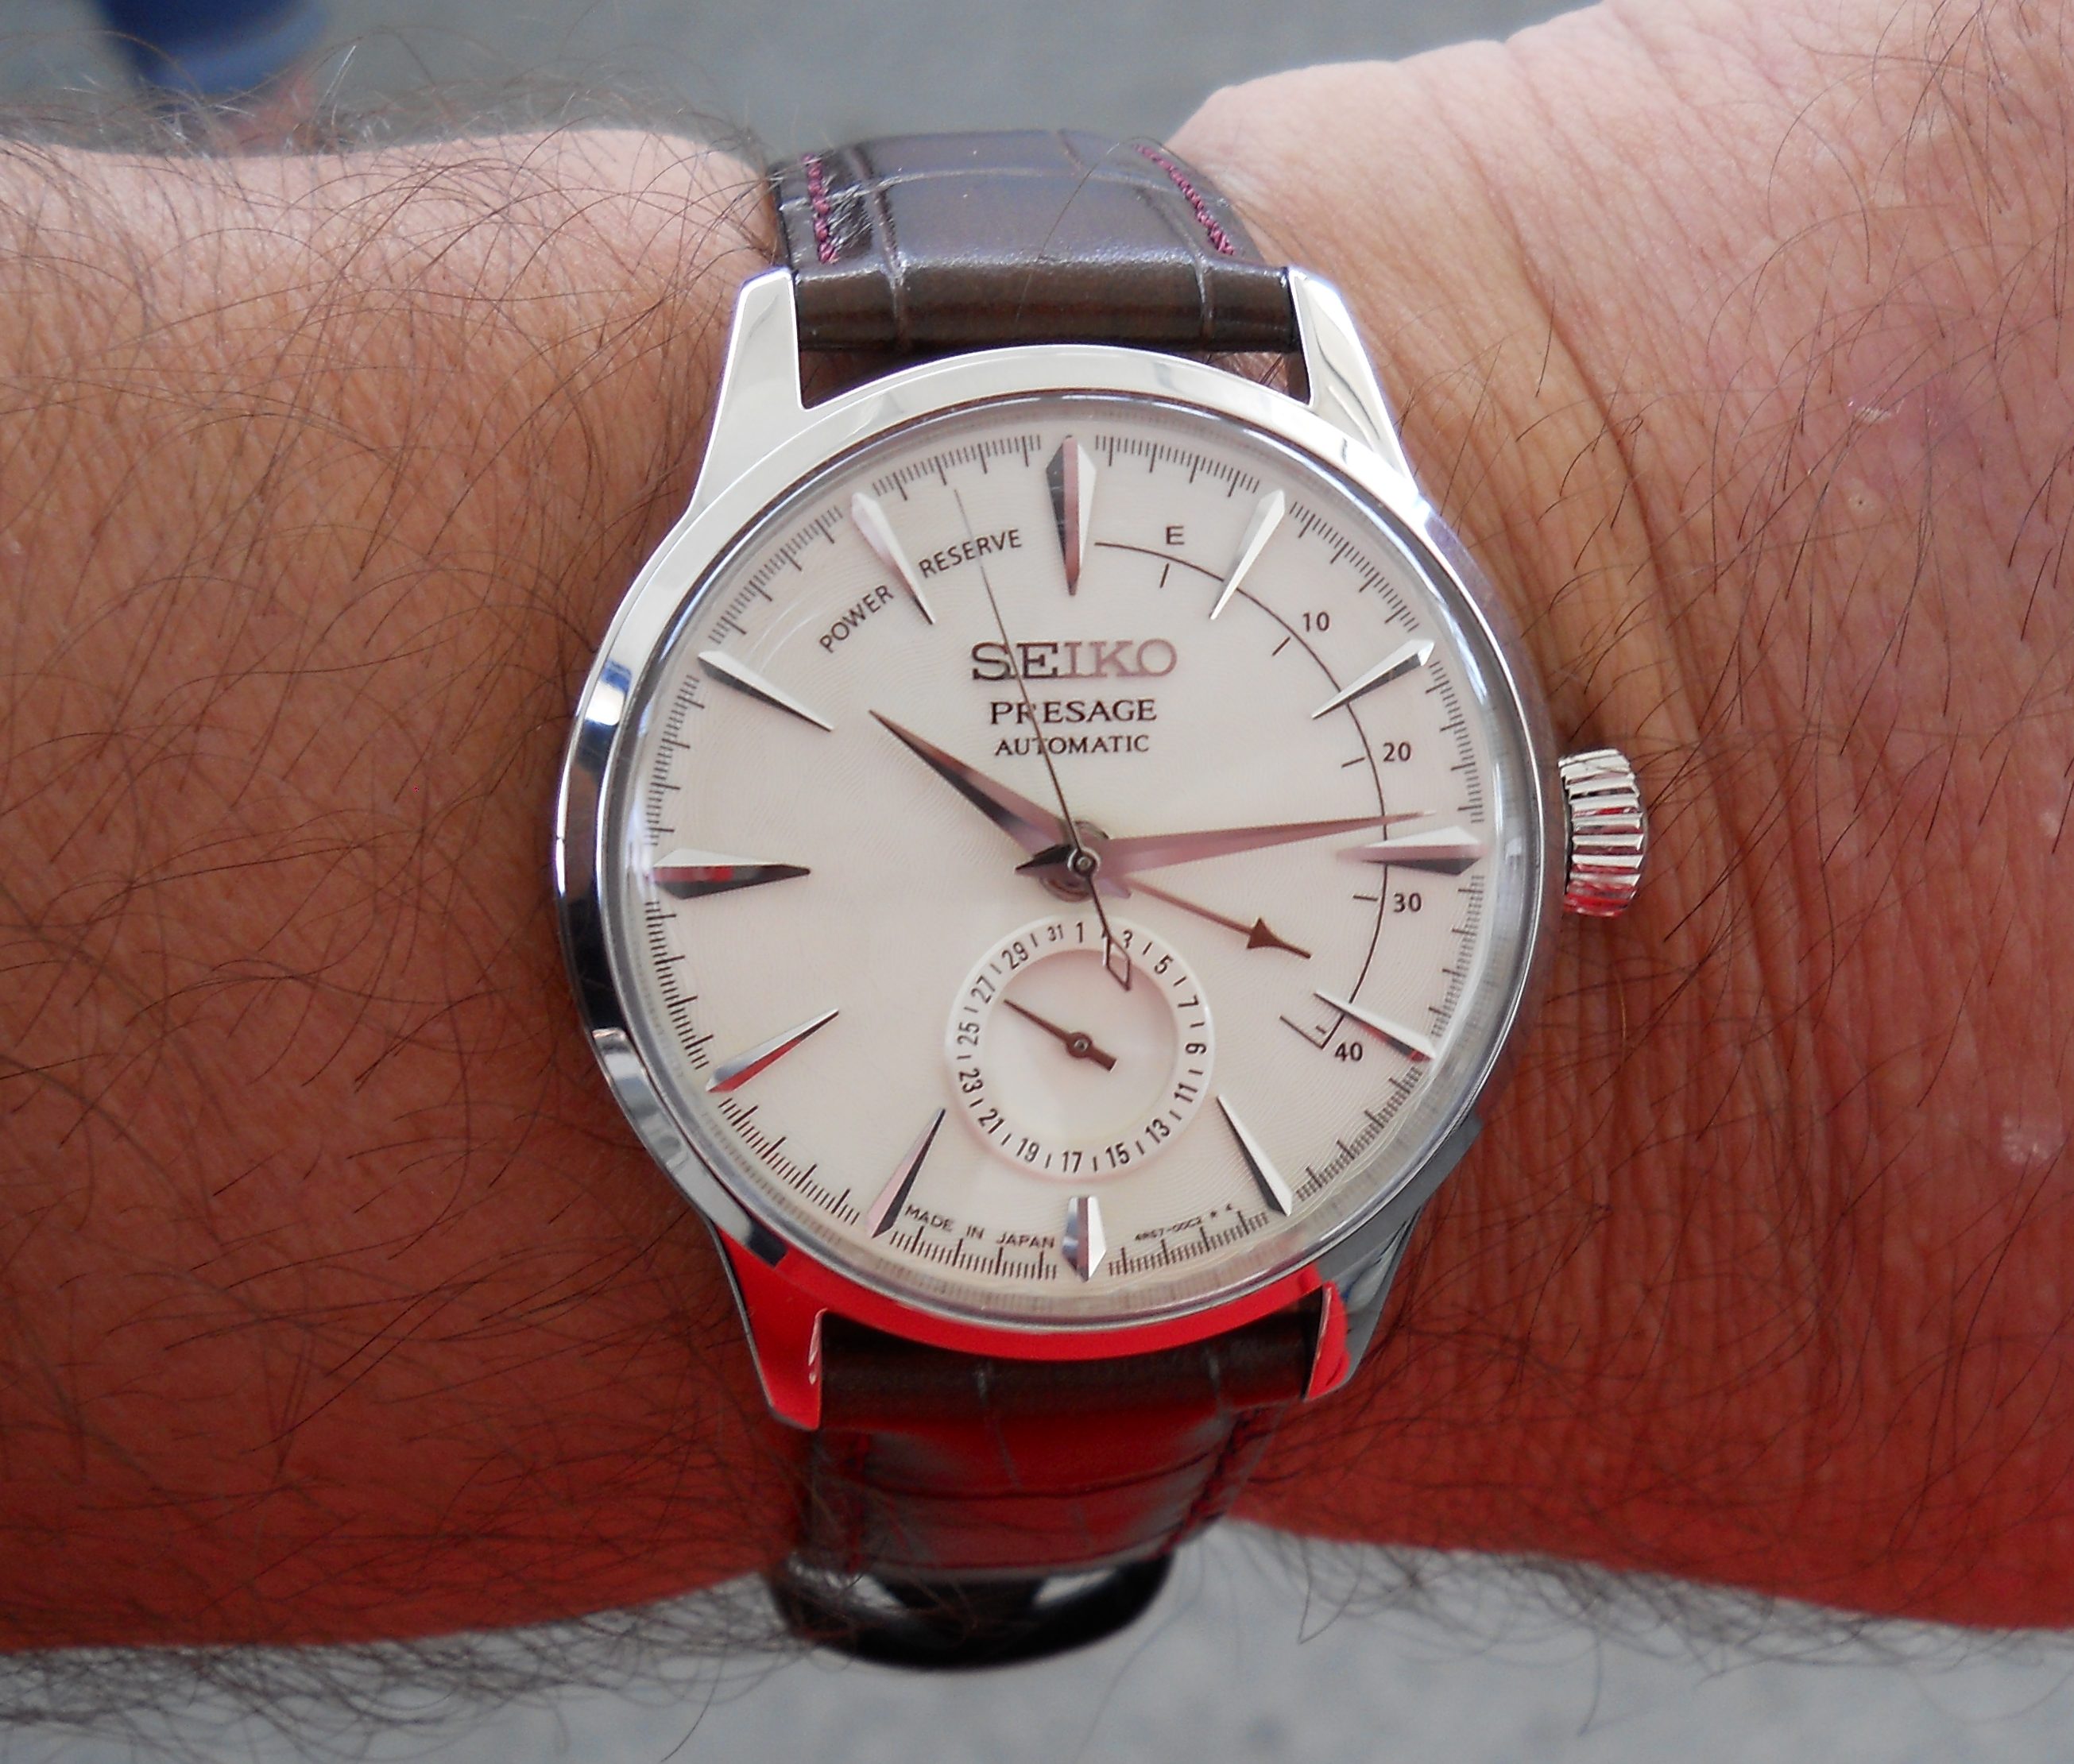 Seiko Presage Limited edition | robswatches